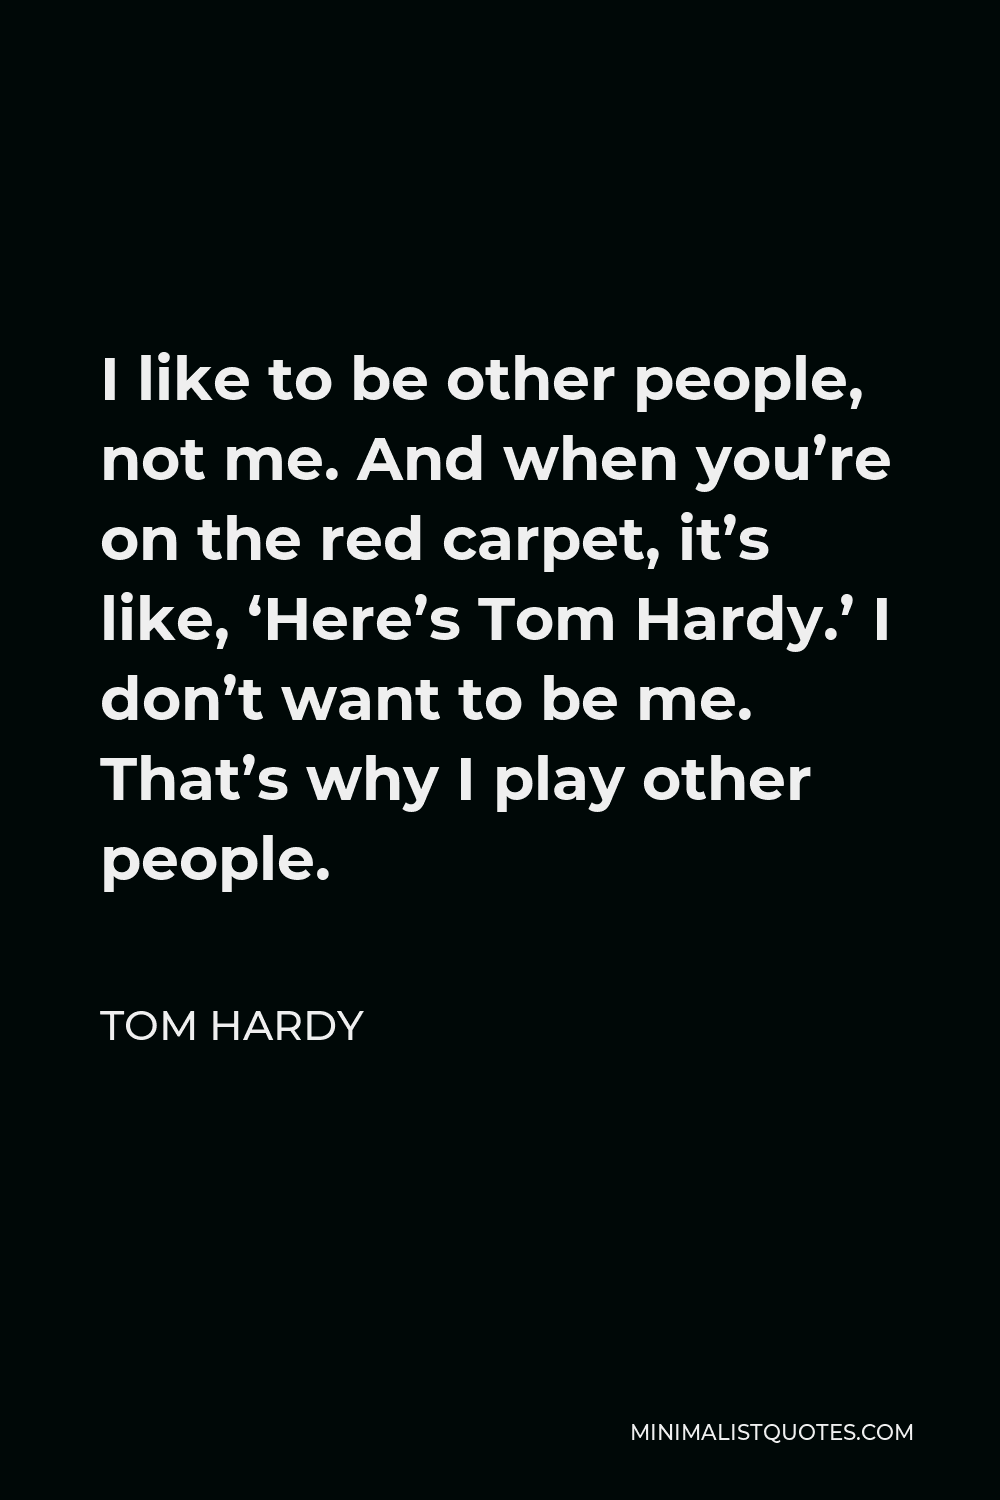 Tom Hardy Quote - I like to be other people, not me. And when you’re on the red carpet, it’s like, ‘Here’s Tom Hardy.’ I don’t want to be me. That’s why I play other people.